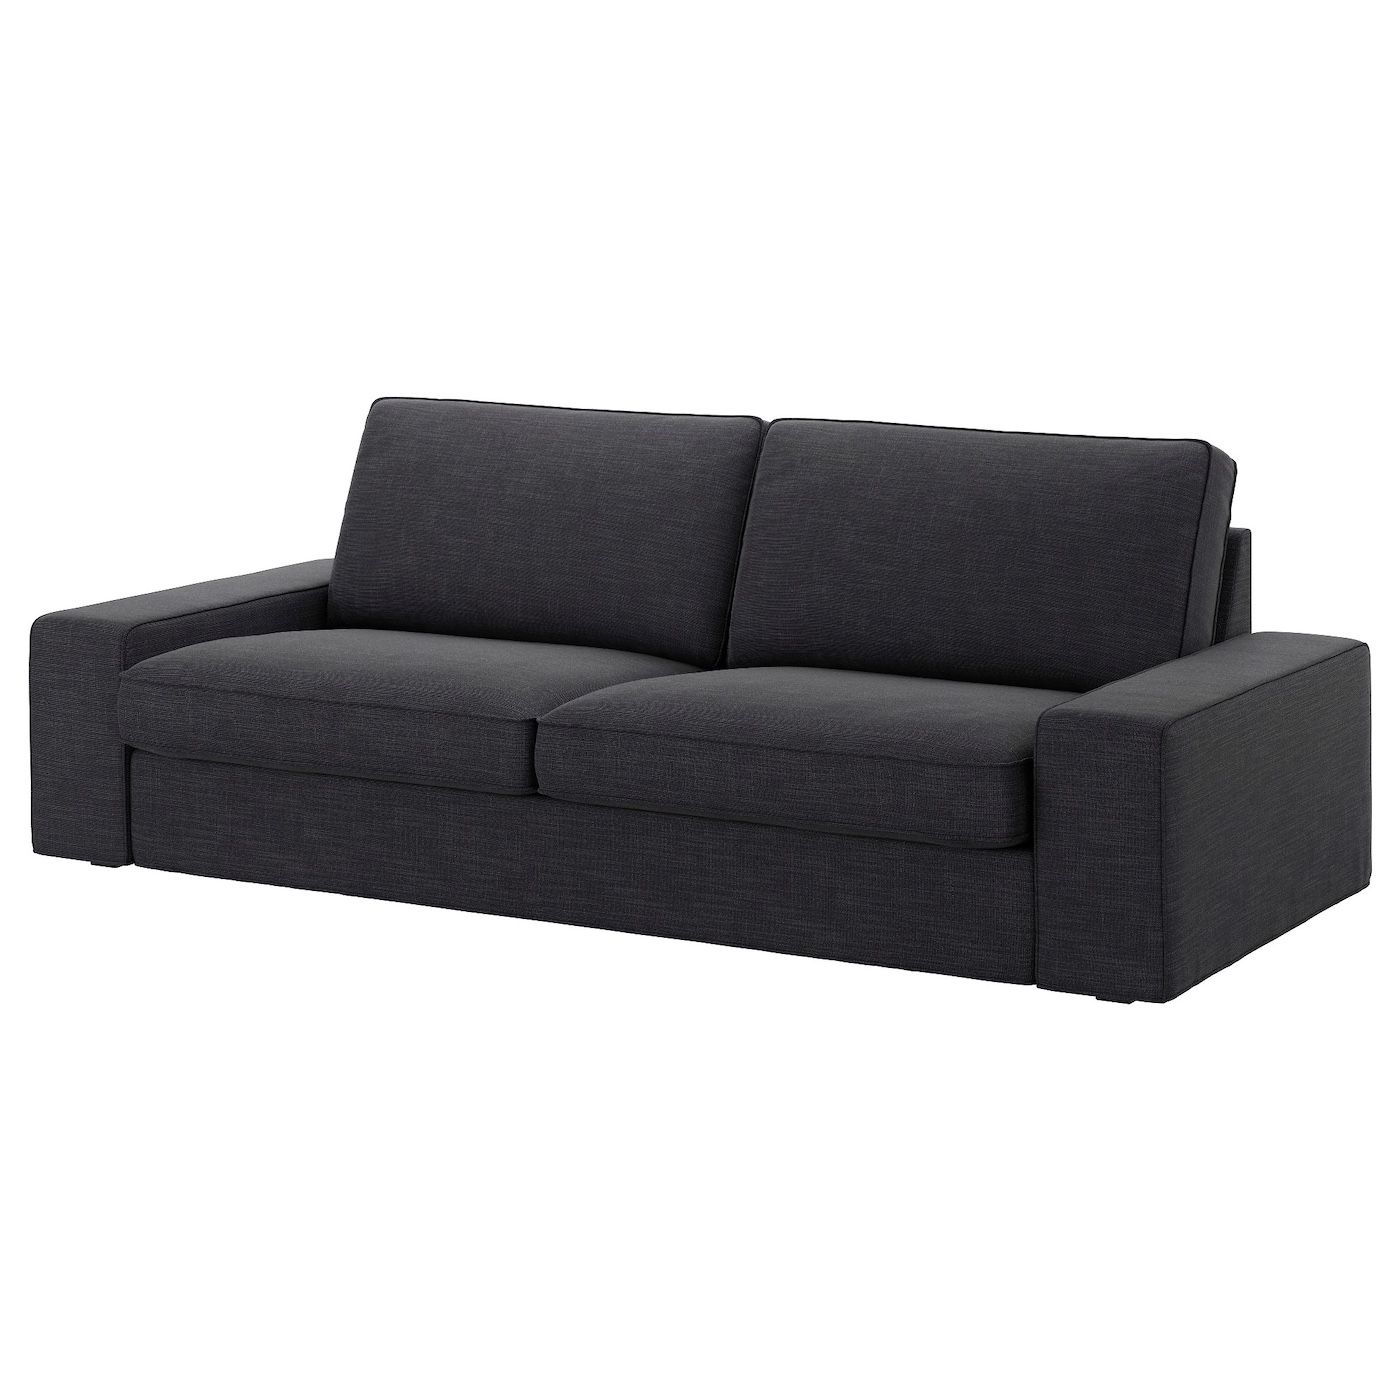 Ikea kivik 3.5 sofa with brown antracite cover